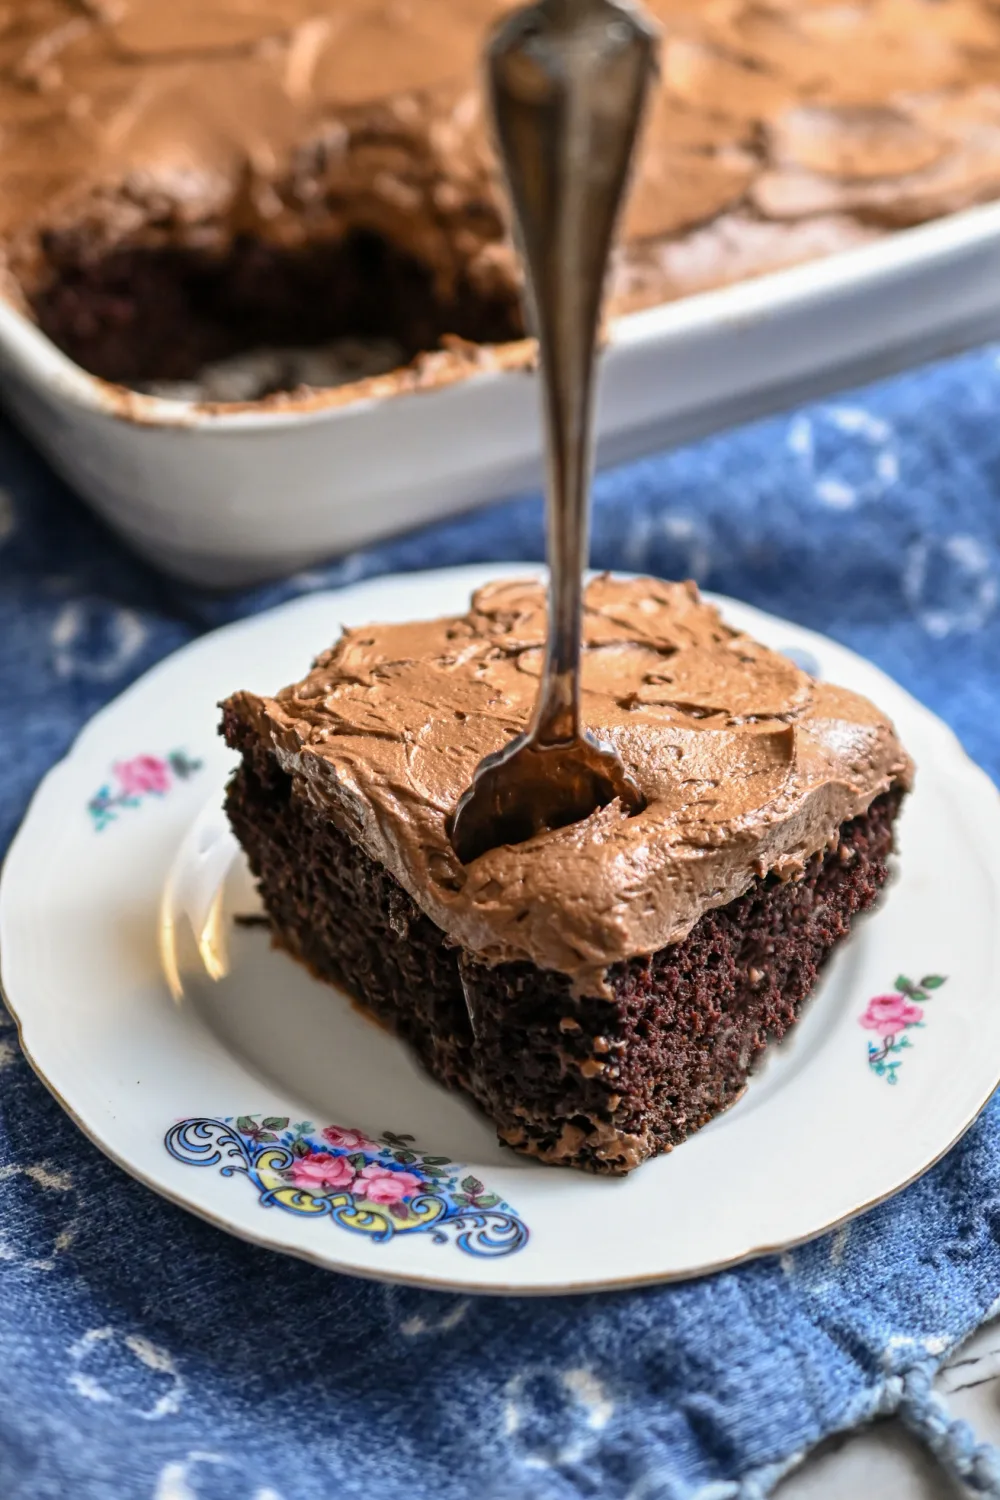 Keto Hershey's chocolate cake served on a small white plate with a fork standing in the center of the slice